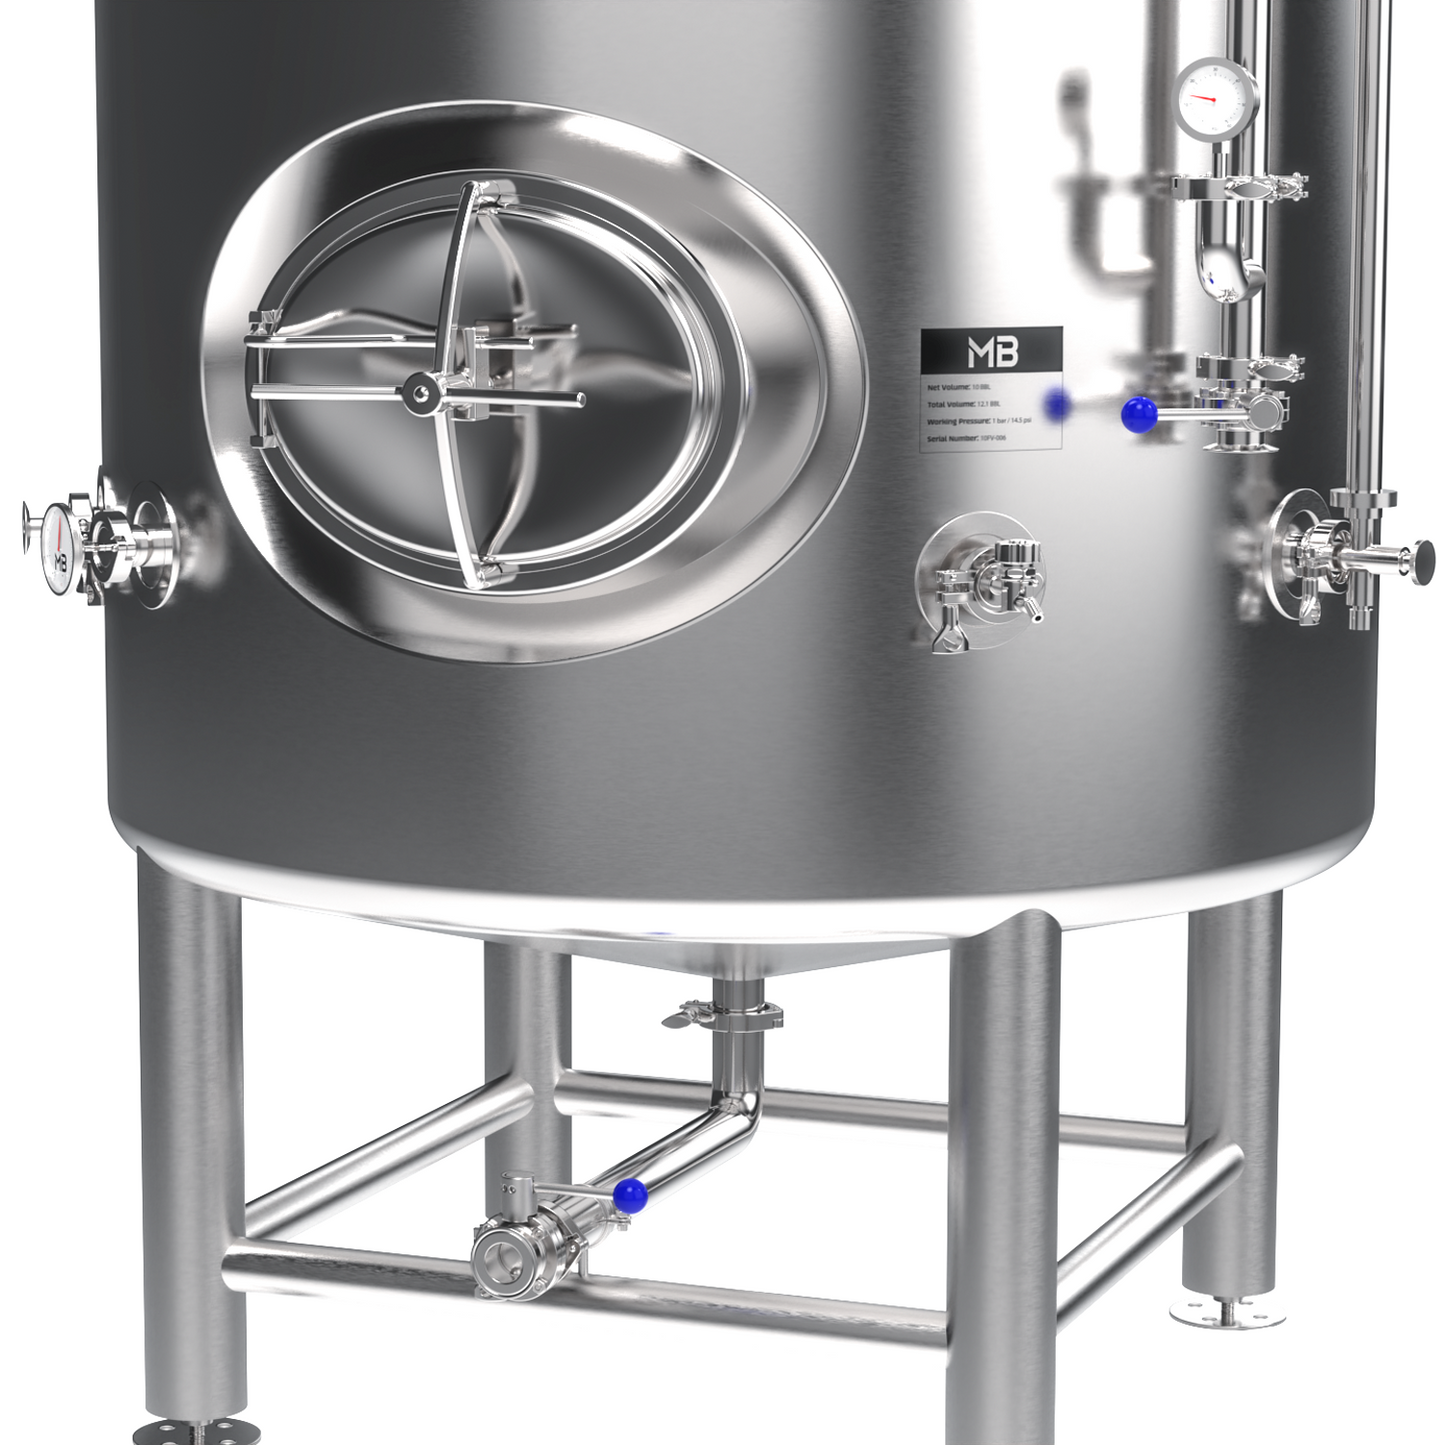 Brite Tank | Jacketed  | 40 bbl